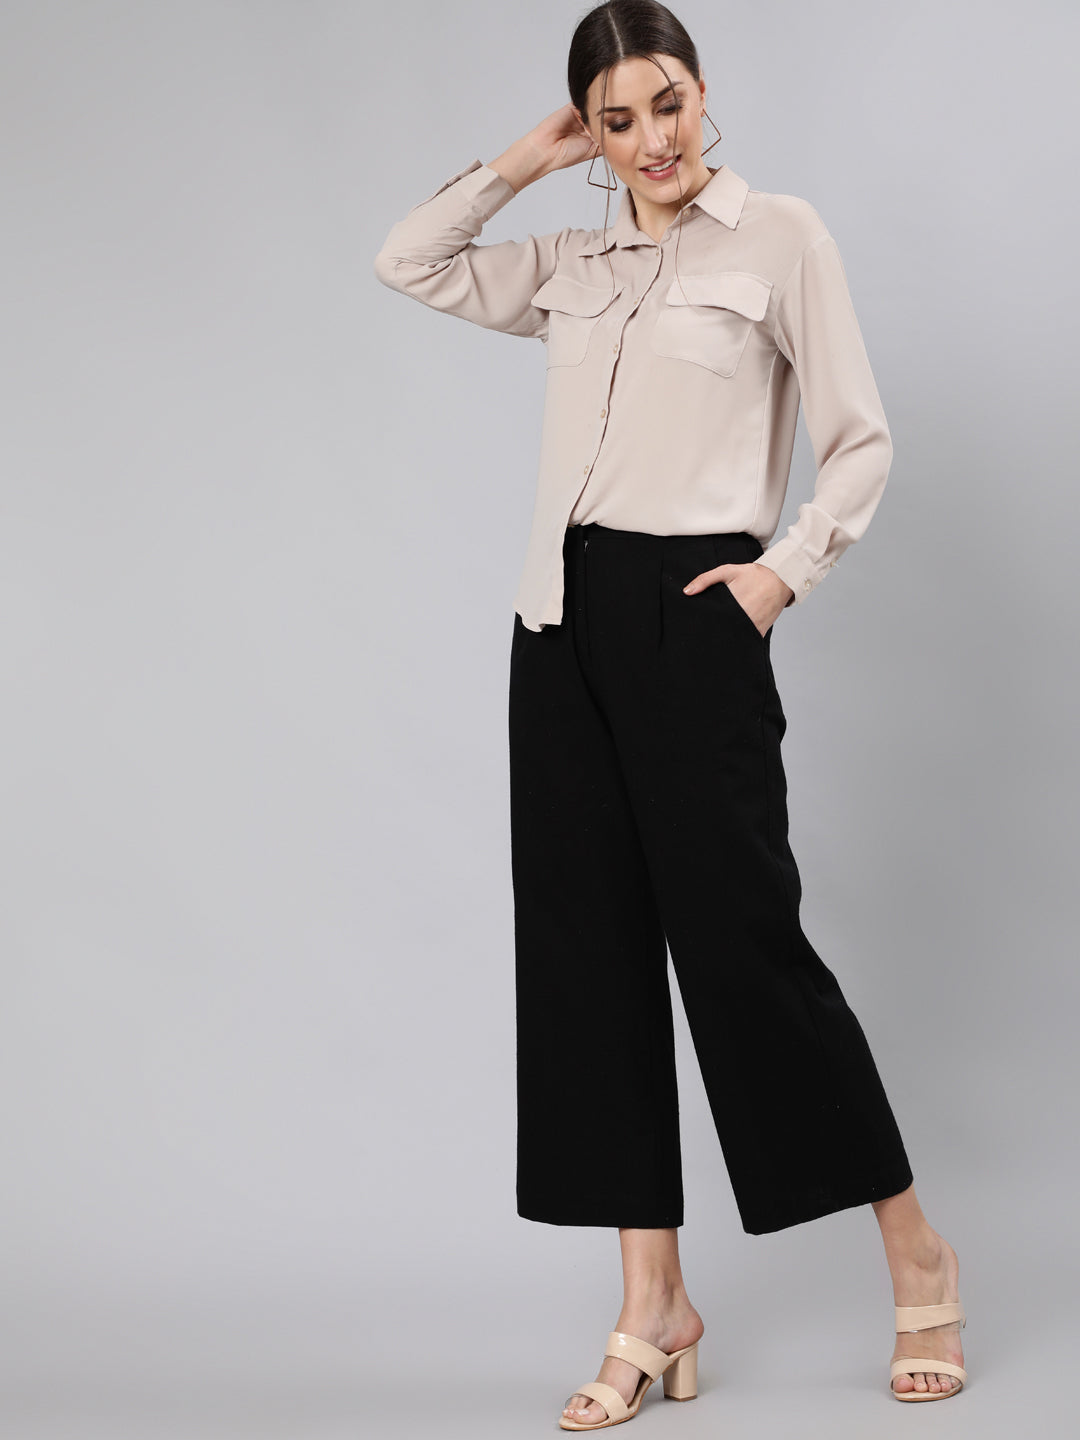 Shop parallel trousers for ladies